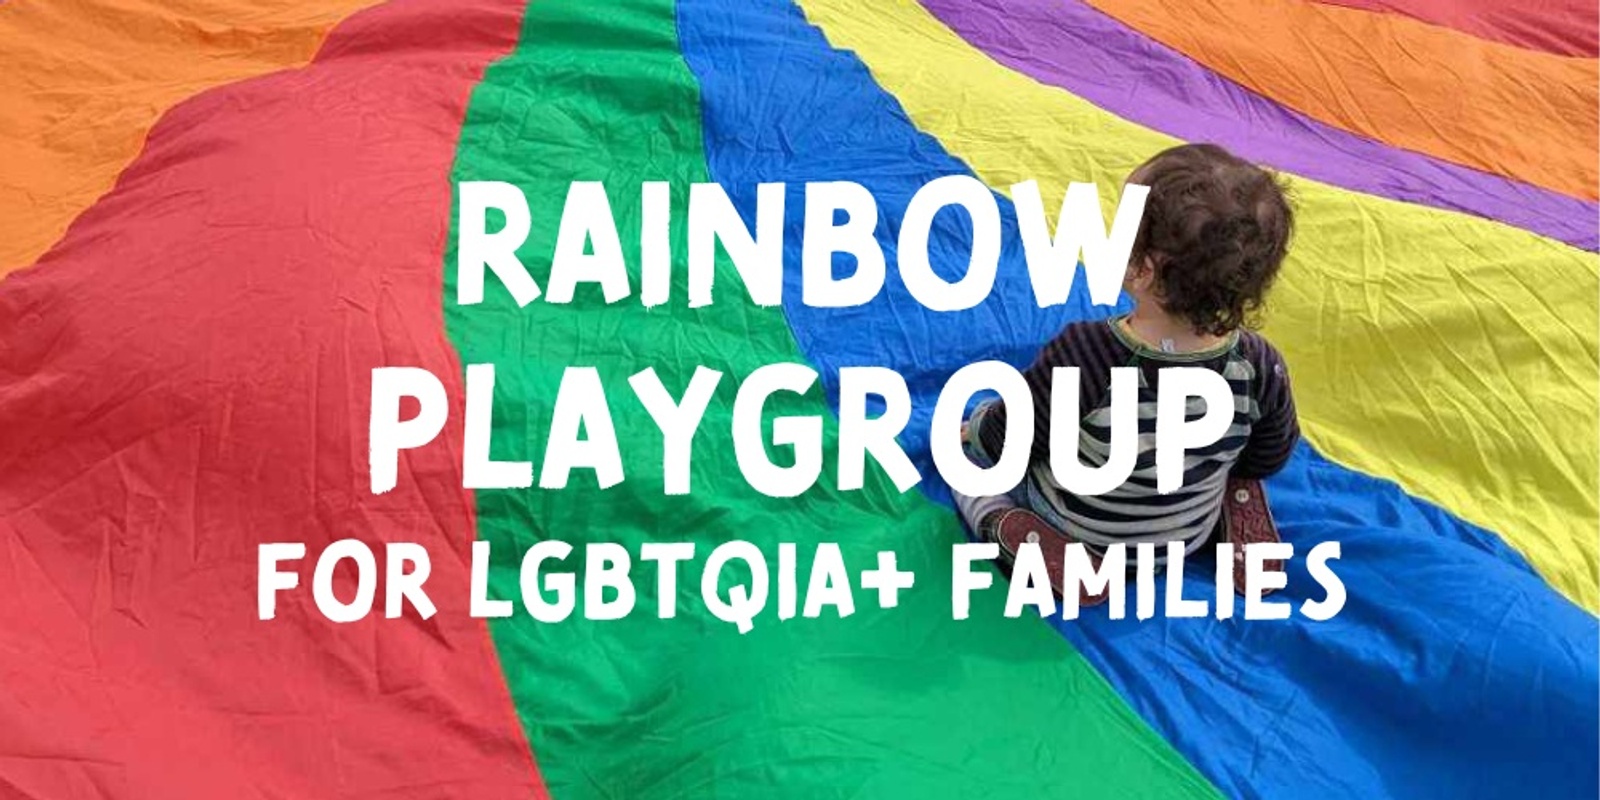 Banner image for Rainbow Playgroup